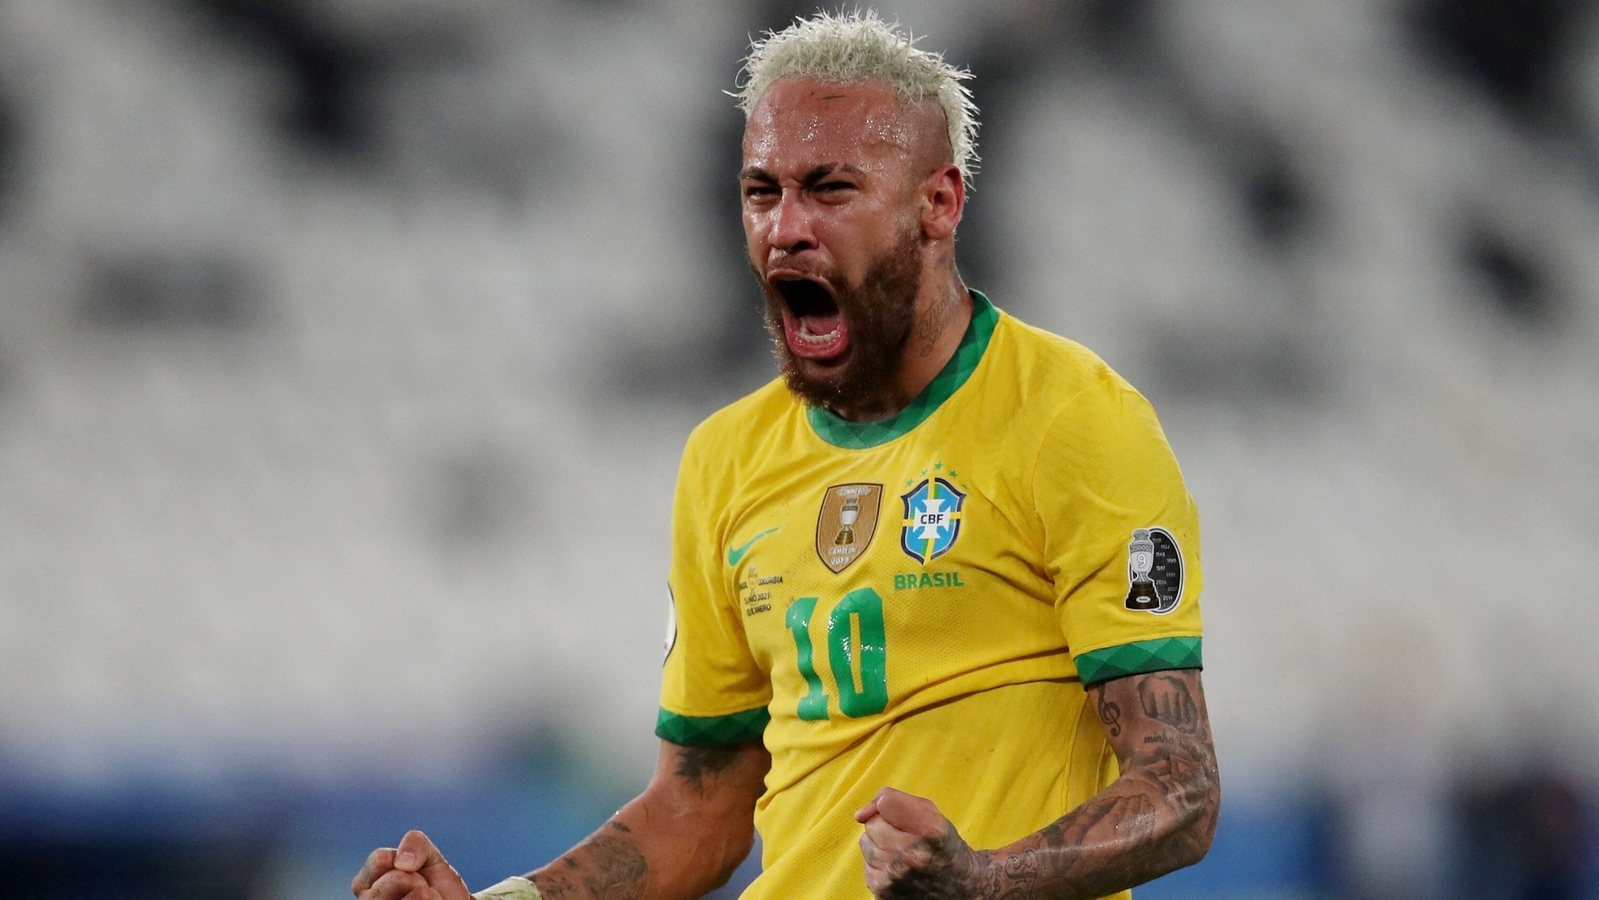 FIFA World Cup 2022: Brazil announce 26-man World Cup squad as